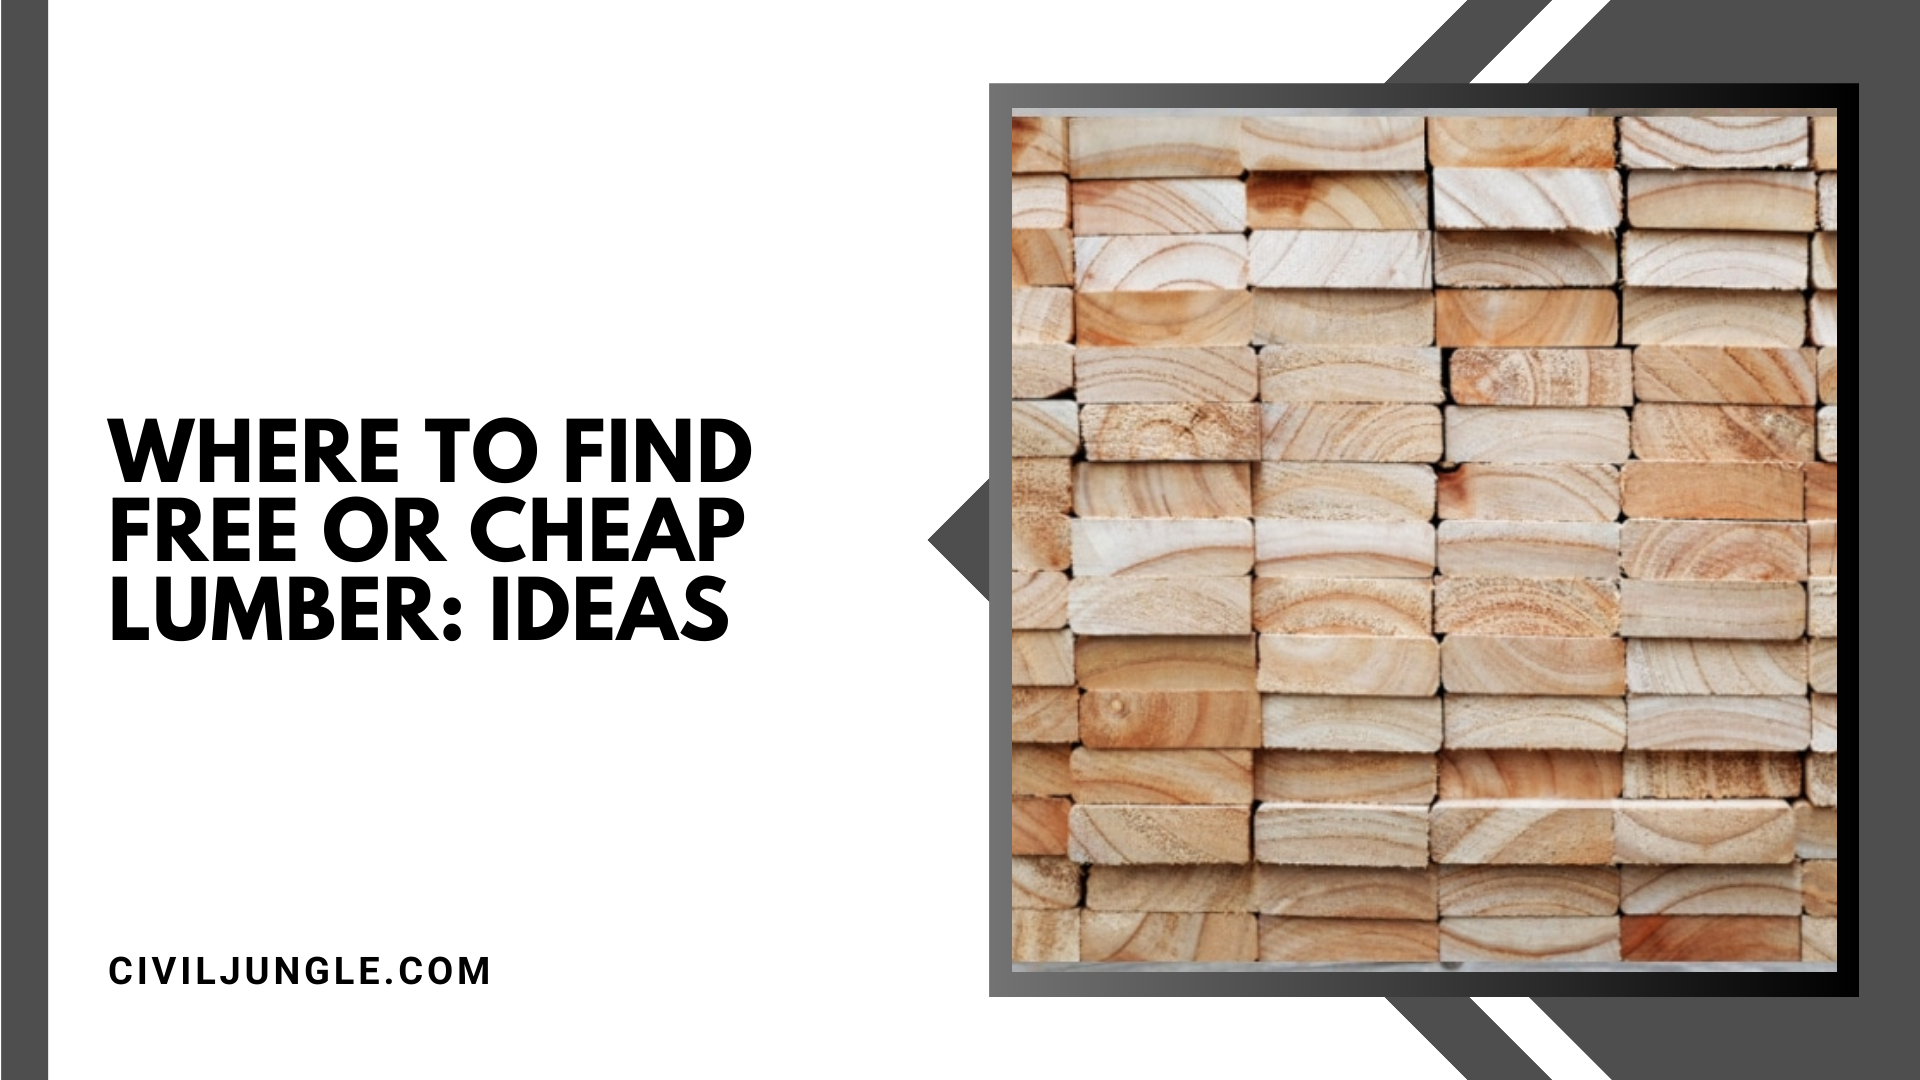 Where to Find Free or Cheap Lumber: Ideas